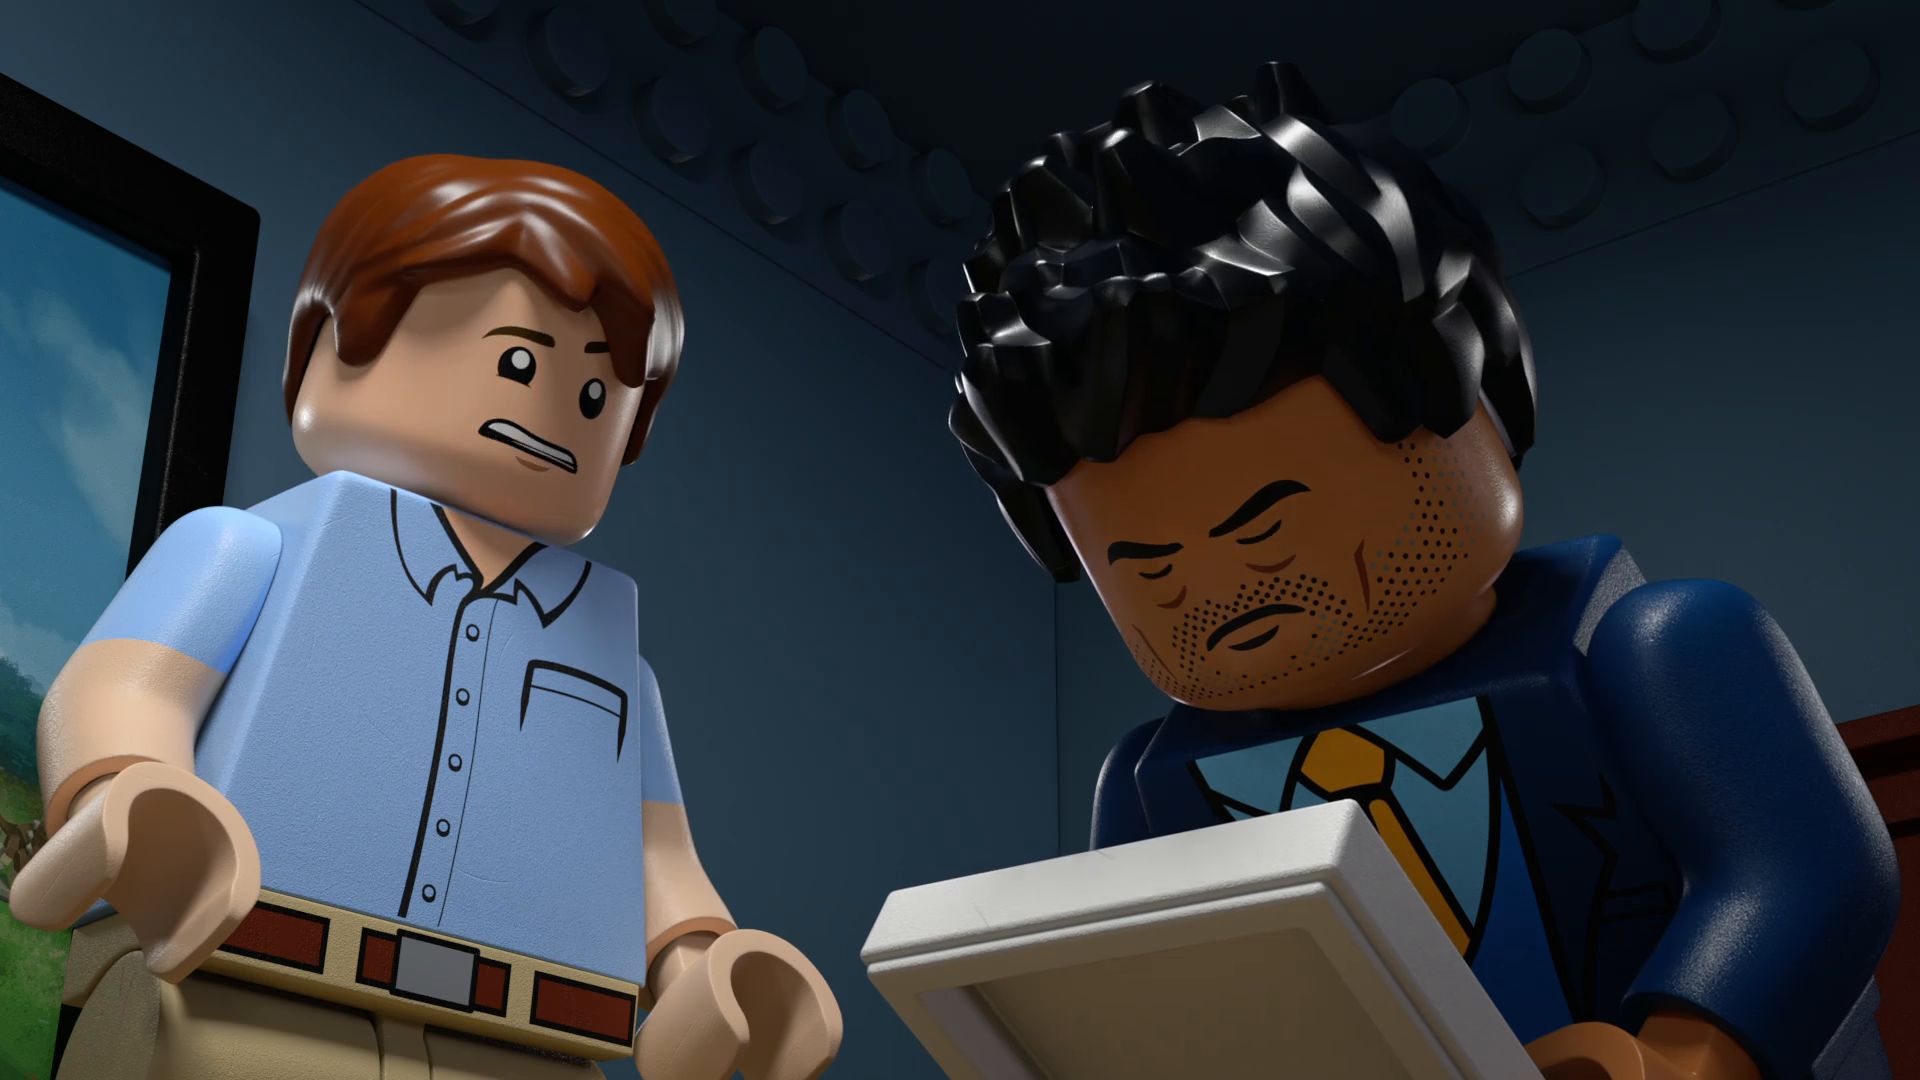 Lego Jurassic World: Double Trouble: Where to Watch and Stream